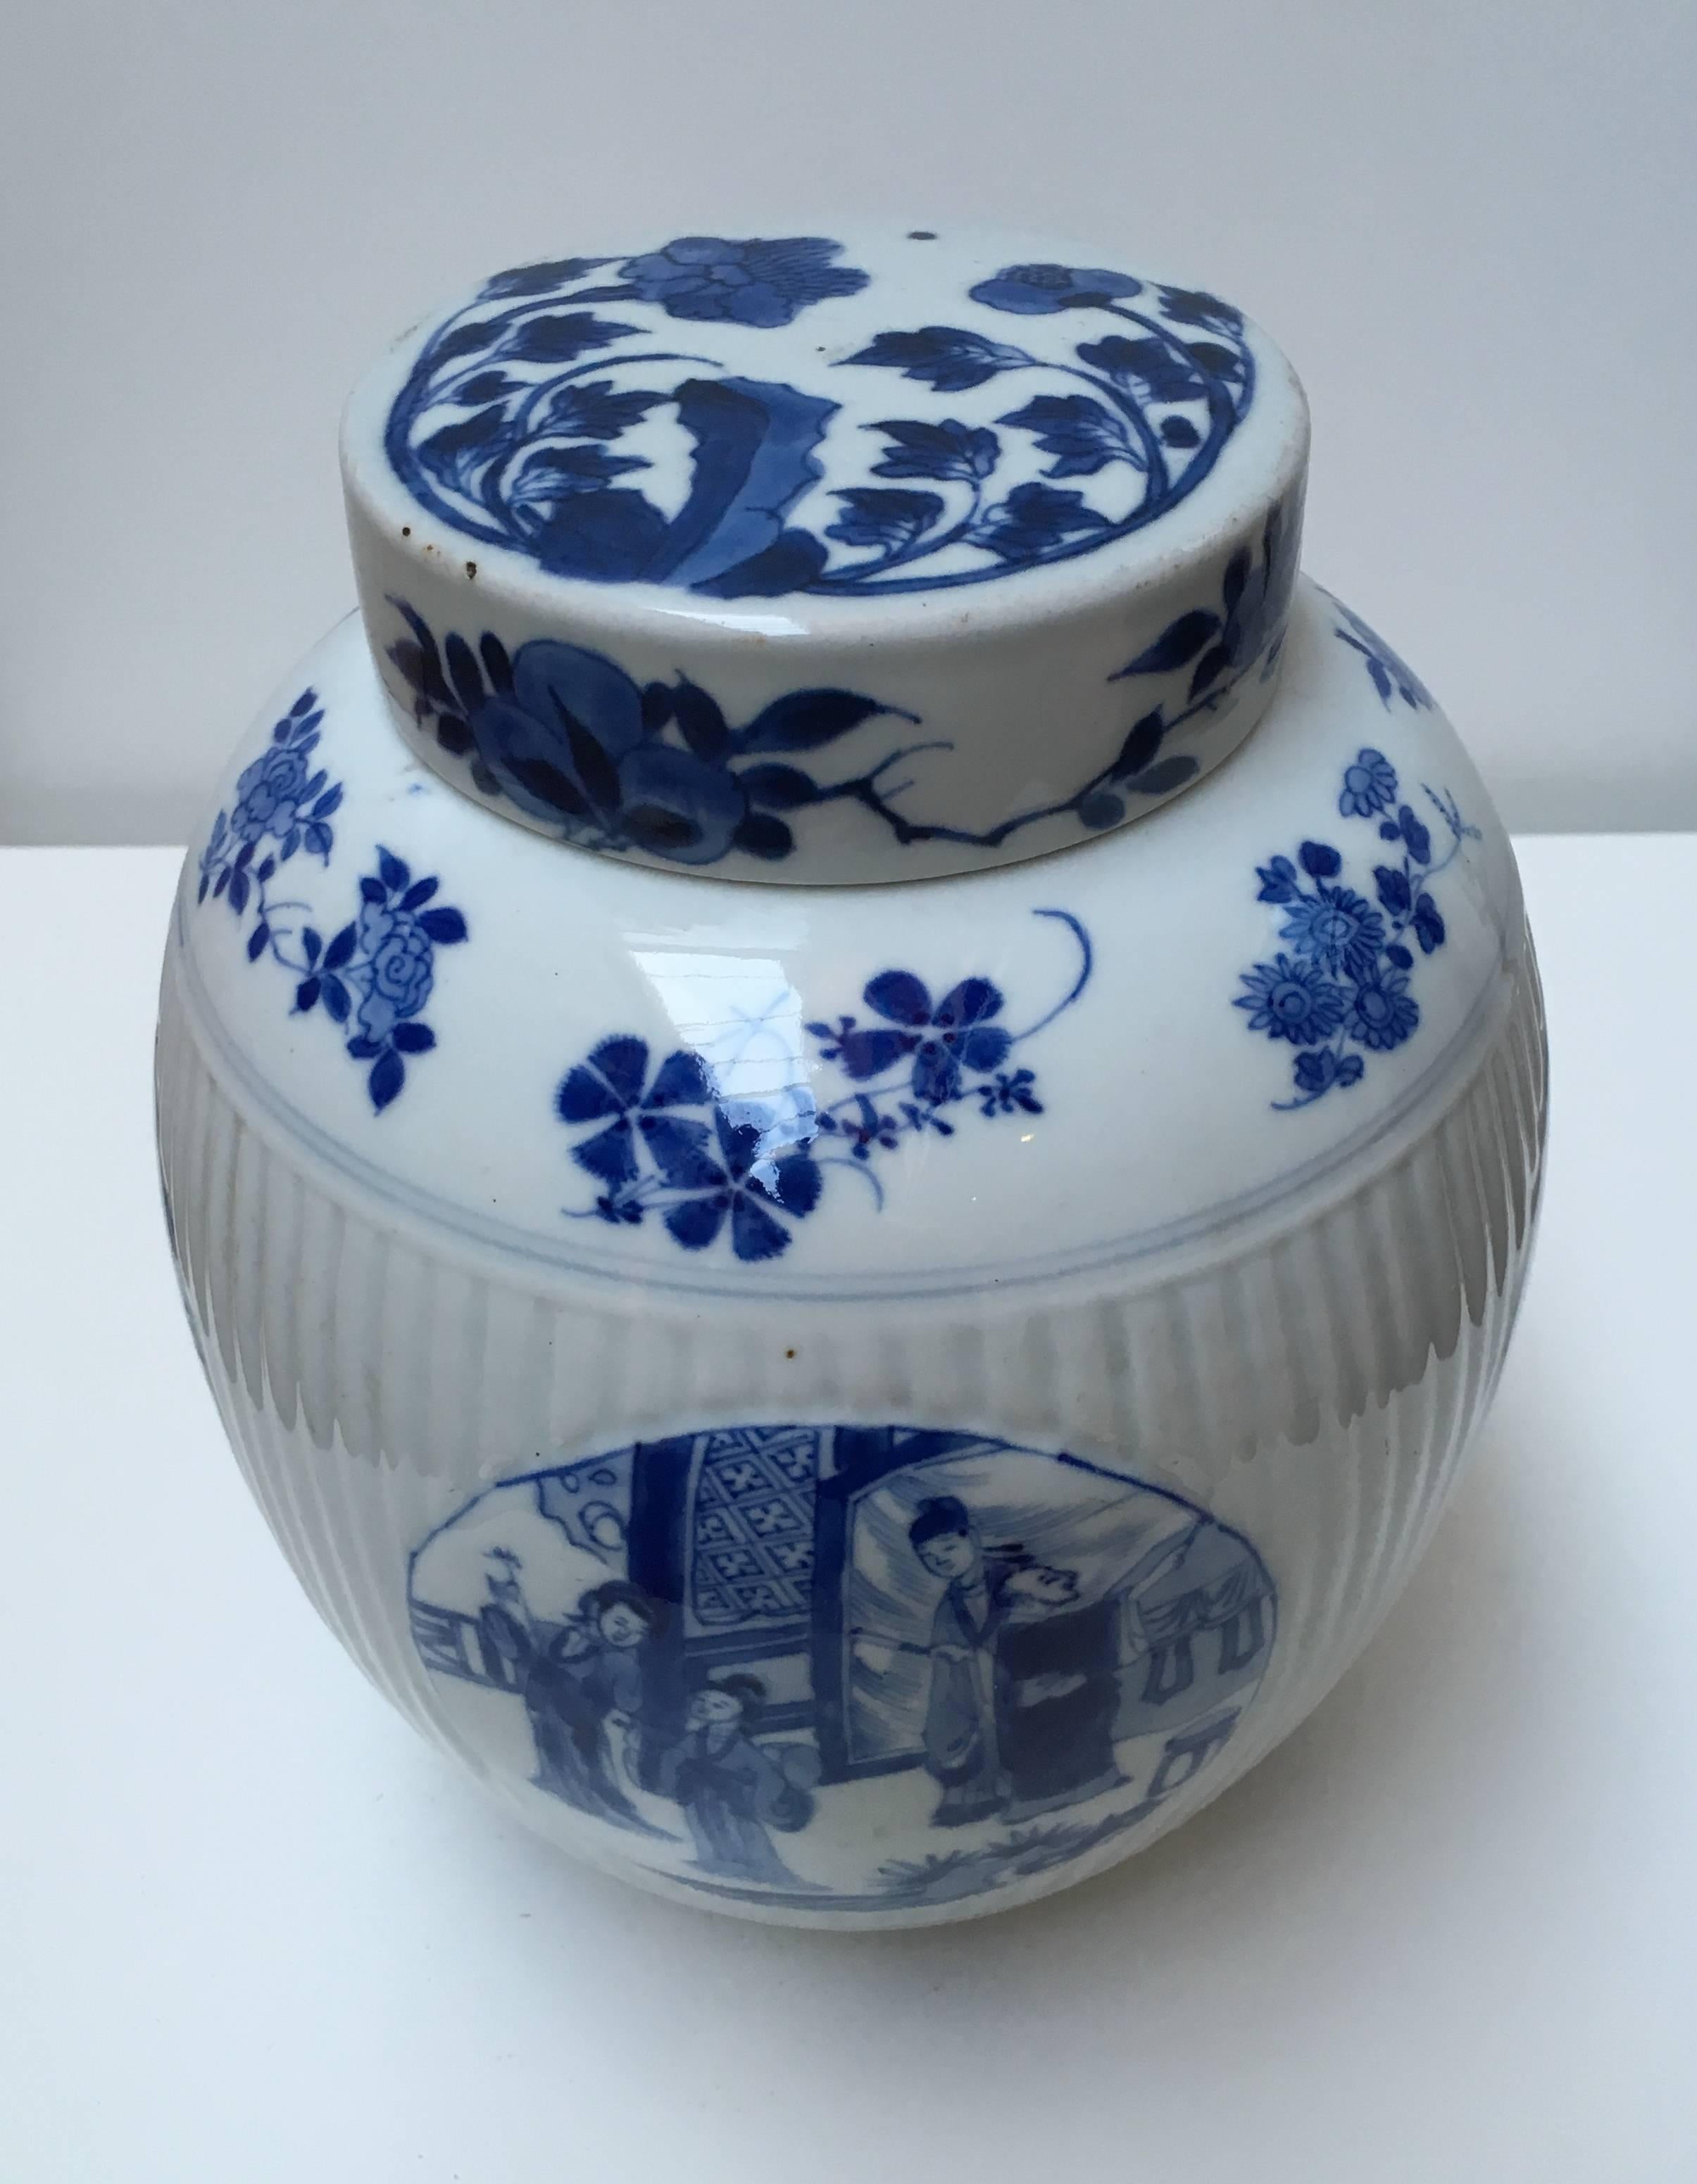 Ovoid, with ribbed middle section, the wide cylindrical cover (matched) over a short unglazed neck, decorated in underglaze blue with four medallions with genre-scenes depicting various persons. The top, bottom and cover decorated with floral